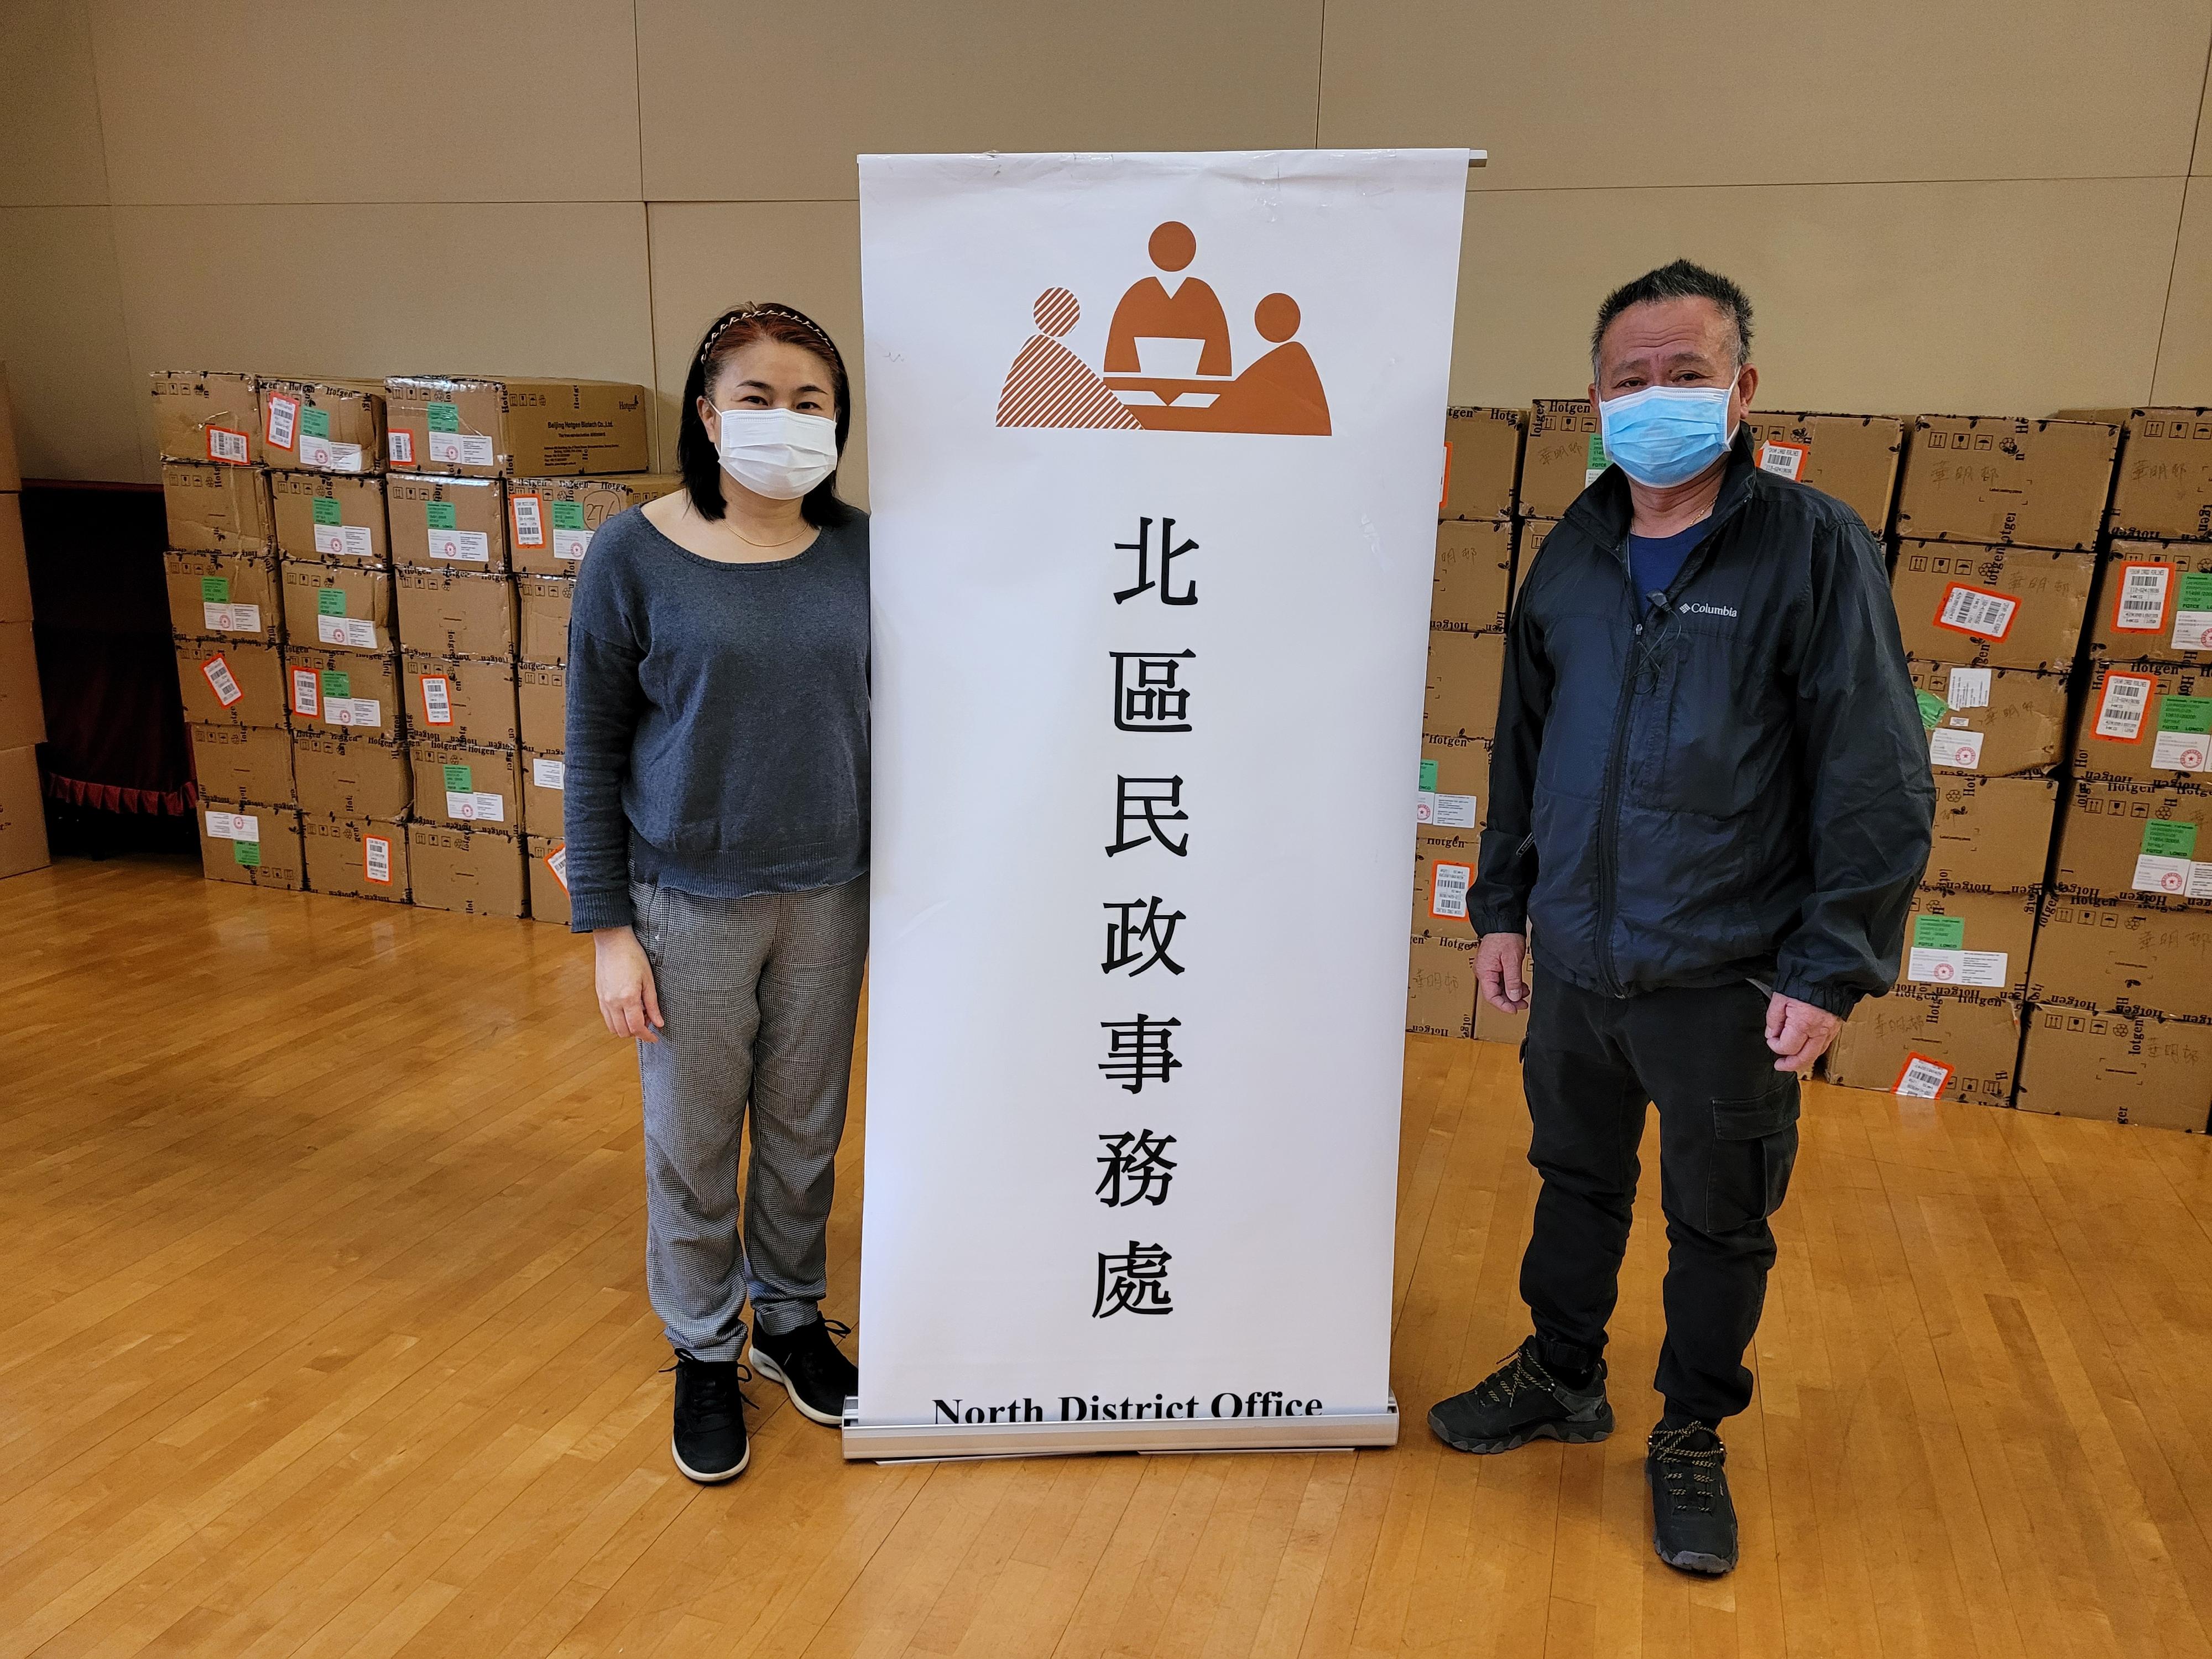 The North District Office today (March 10) distributed COVID-19 rapid test kits to households, cleansing workers and property management staff living and working in Wah Ming Estate for voluntary testing through the property management company.